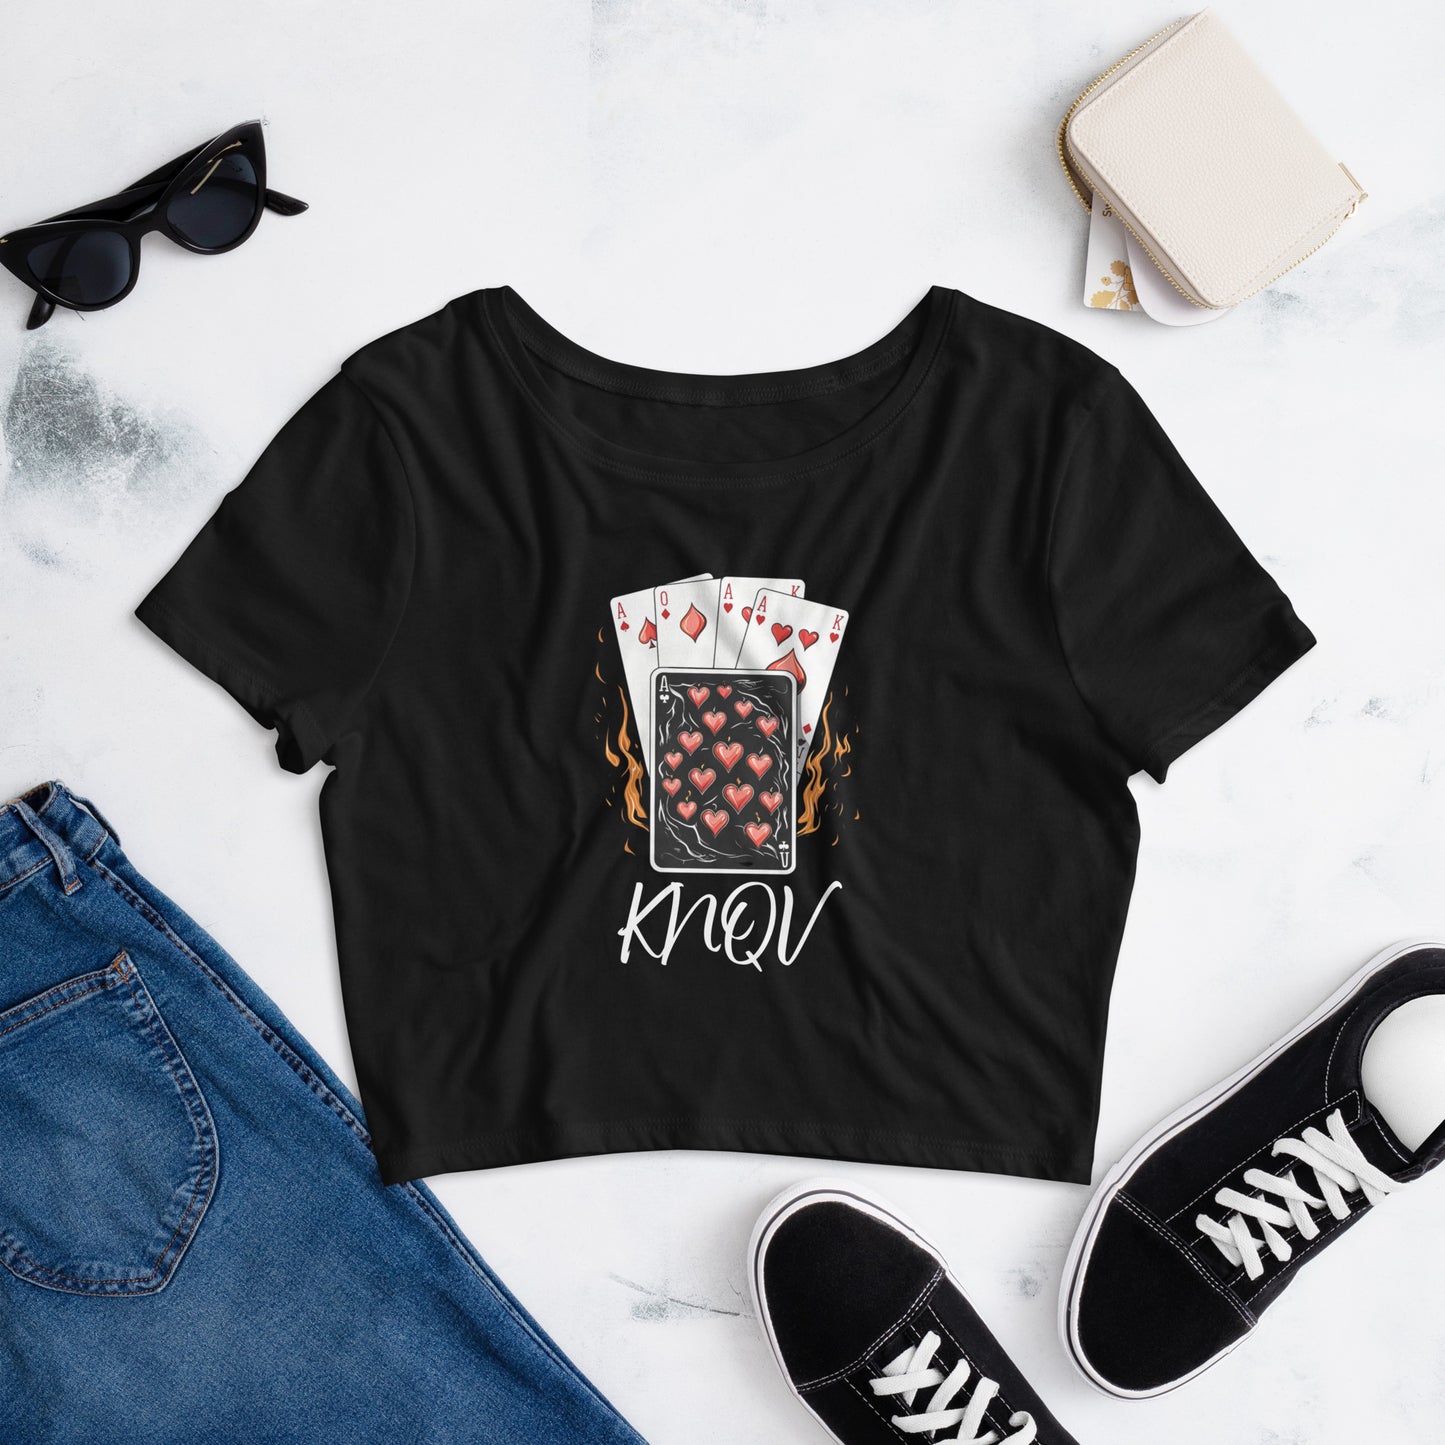 Flaming Cards Women's Crop Top, Knqv, Gift Deck of Cards Women's Crop Top Tees Standard, Gift for Christmas,  Crop Top Casino Deck of Cards on Fire Short sleeve Crop Top Women's  t-shirt, Women’s Crop Tee